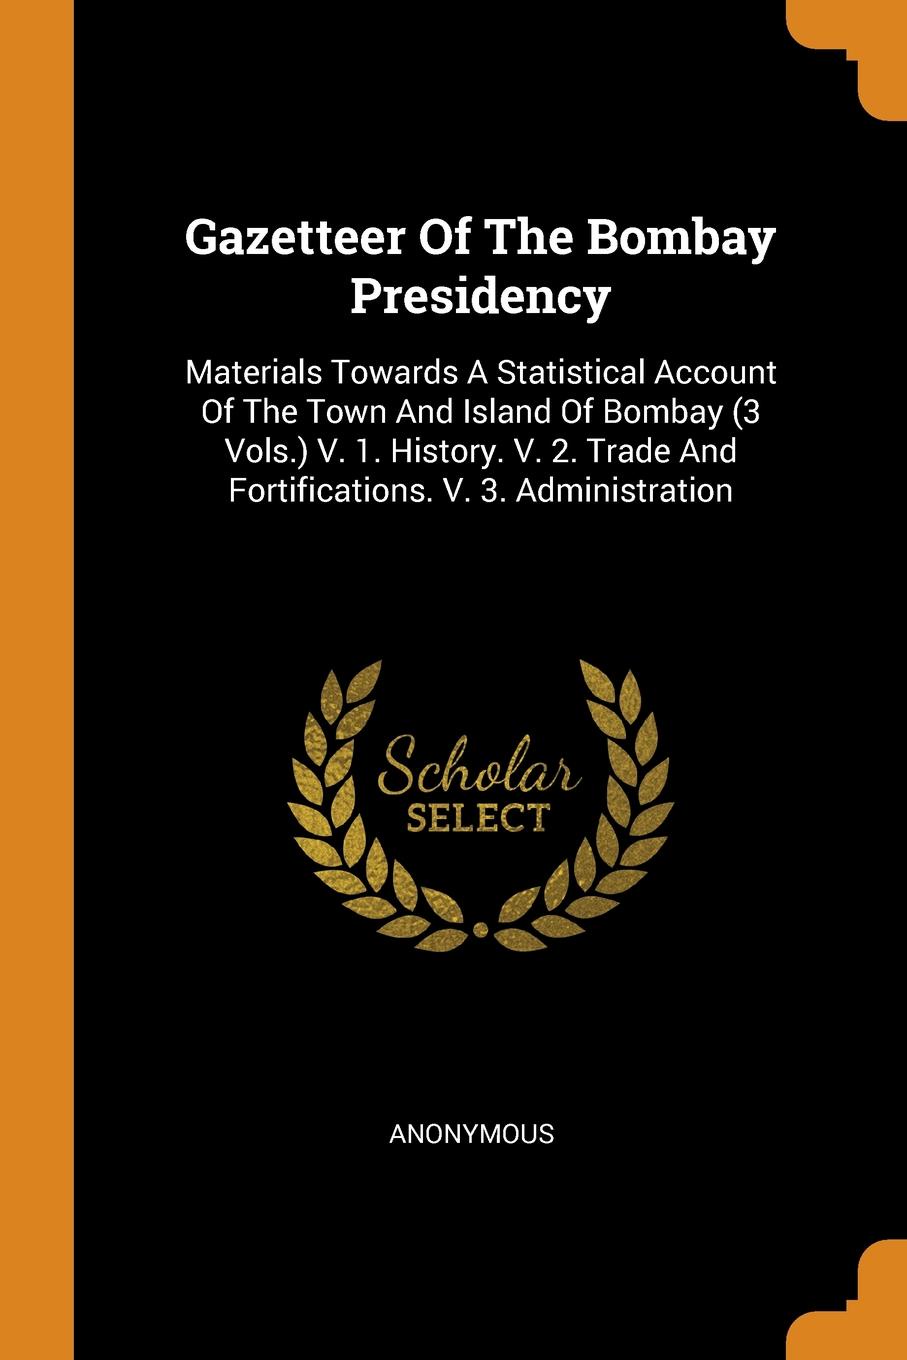 фото Gazetteer Of The Bombay Presidency. Materials Towards A Statistical Account Of The Town And Island Of Bombay (3 Vols.) V. 1. History. V. 2. Trade And Fortifications. V. 3. Administration